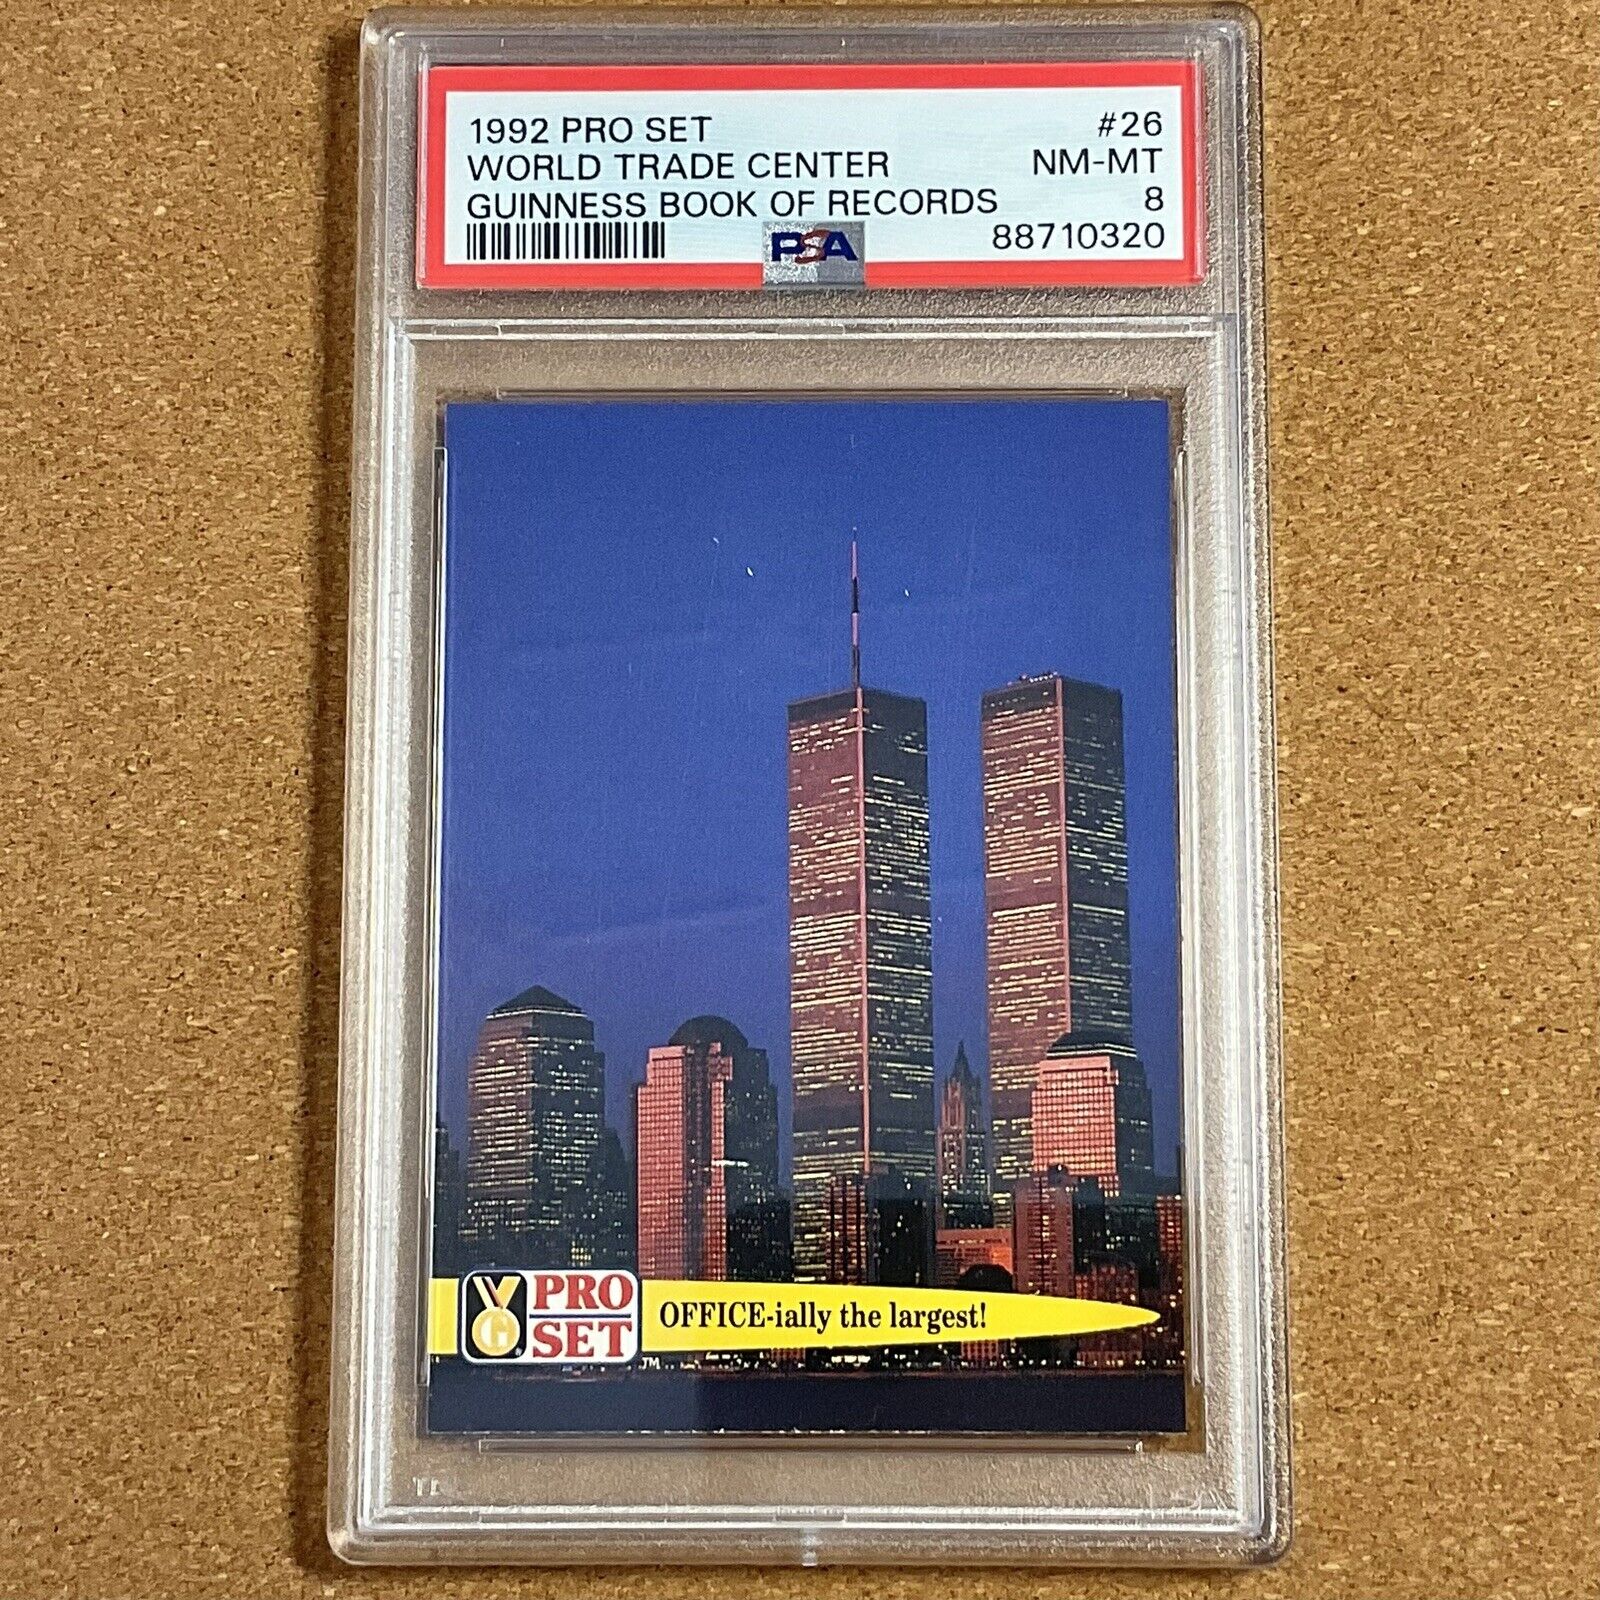 WORLD TRADE CENTER 1992 GUINNESS BOOK OF RECORDS LARGEST OFFICE PSA 8 NM-MT